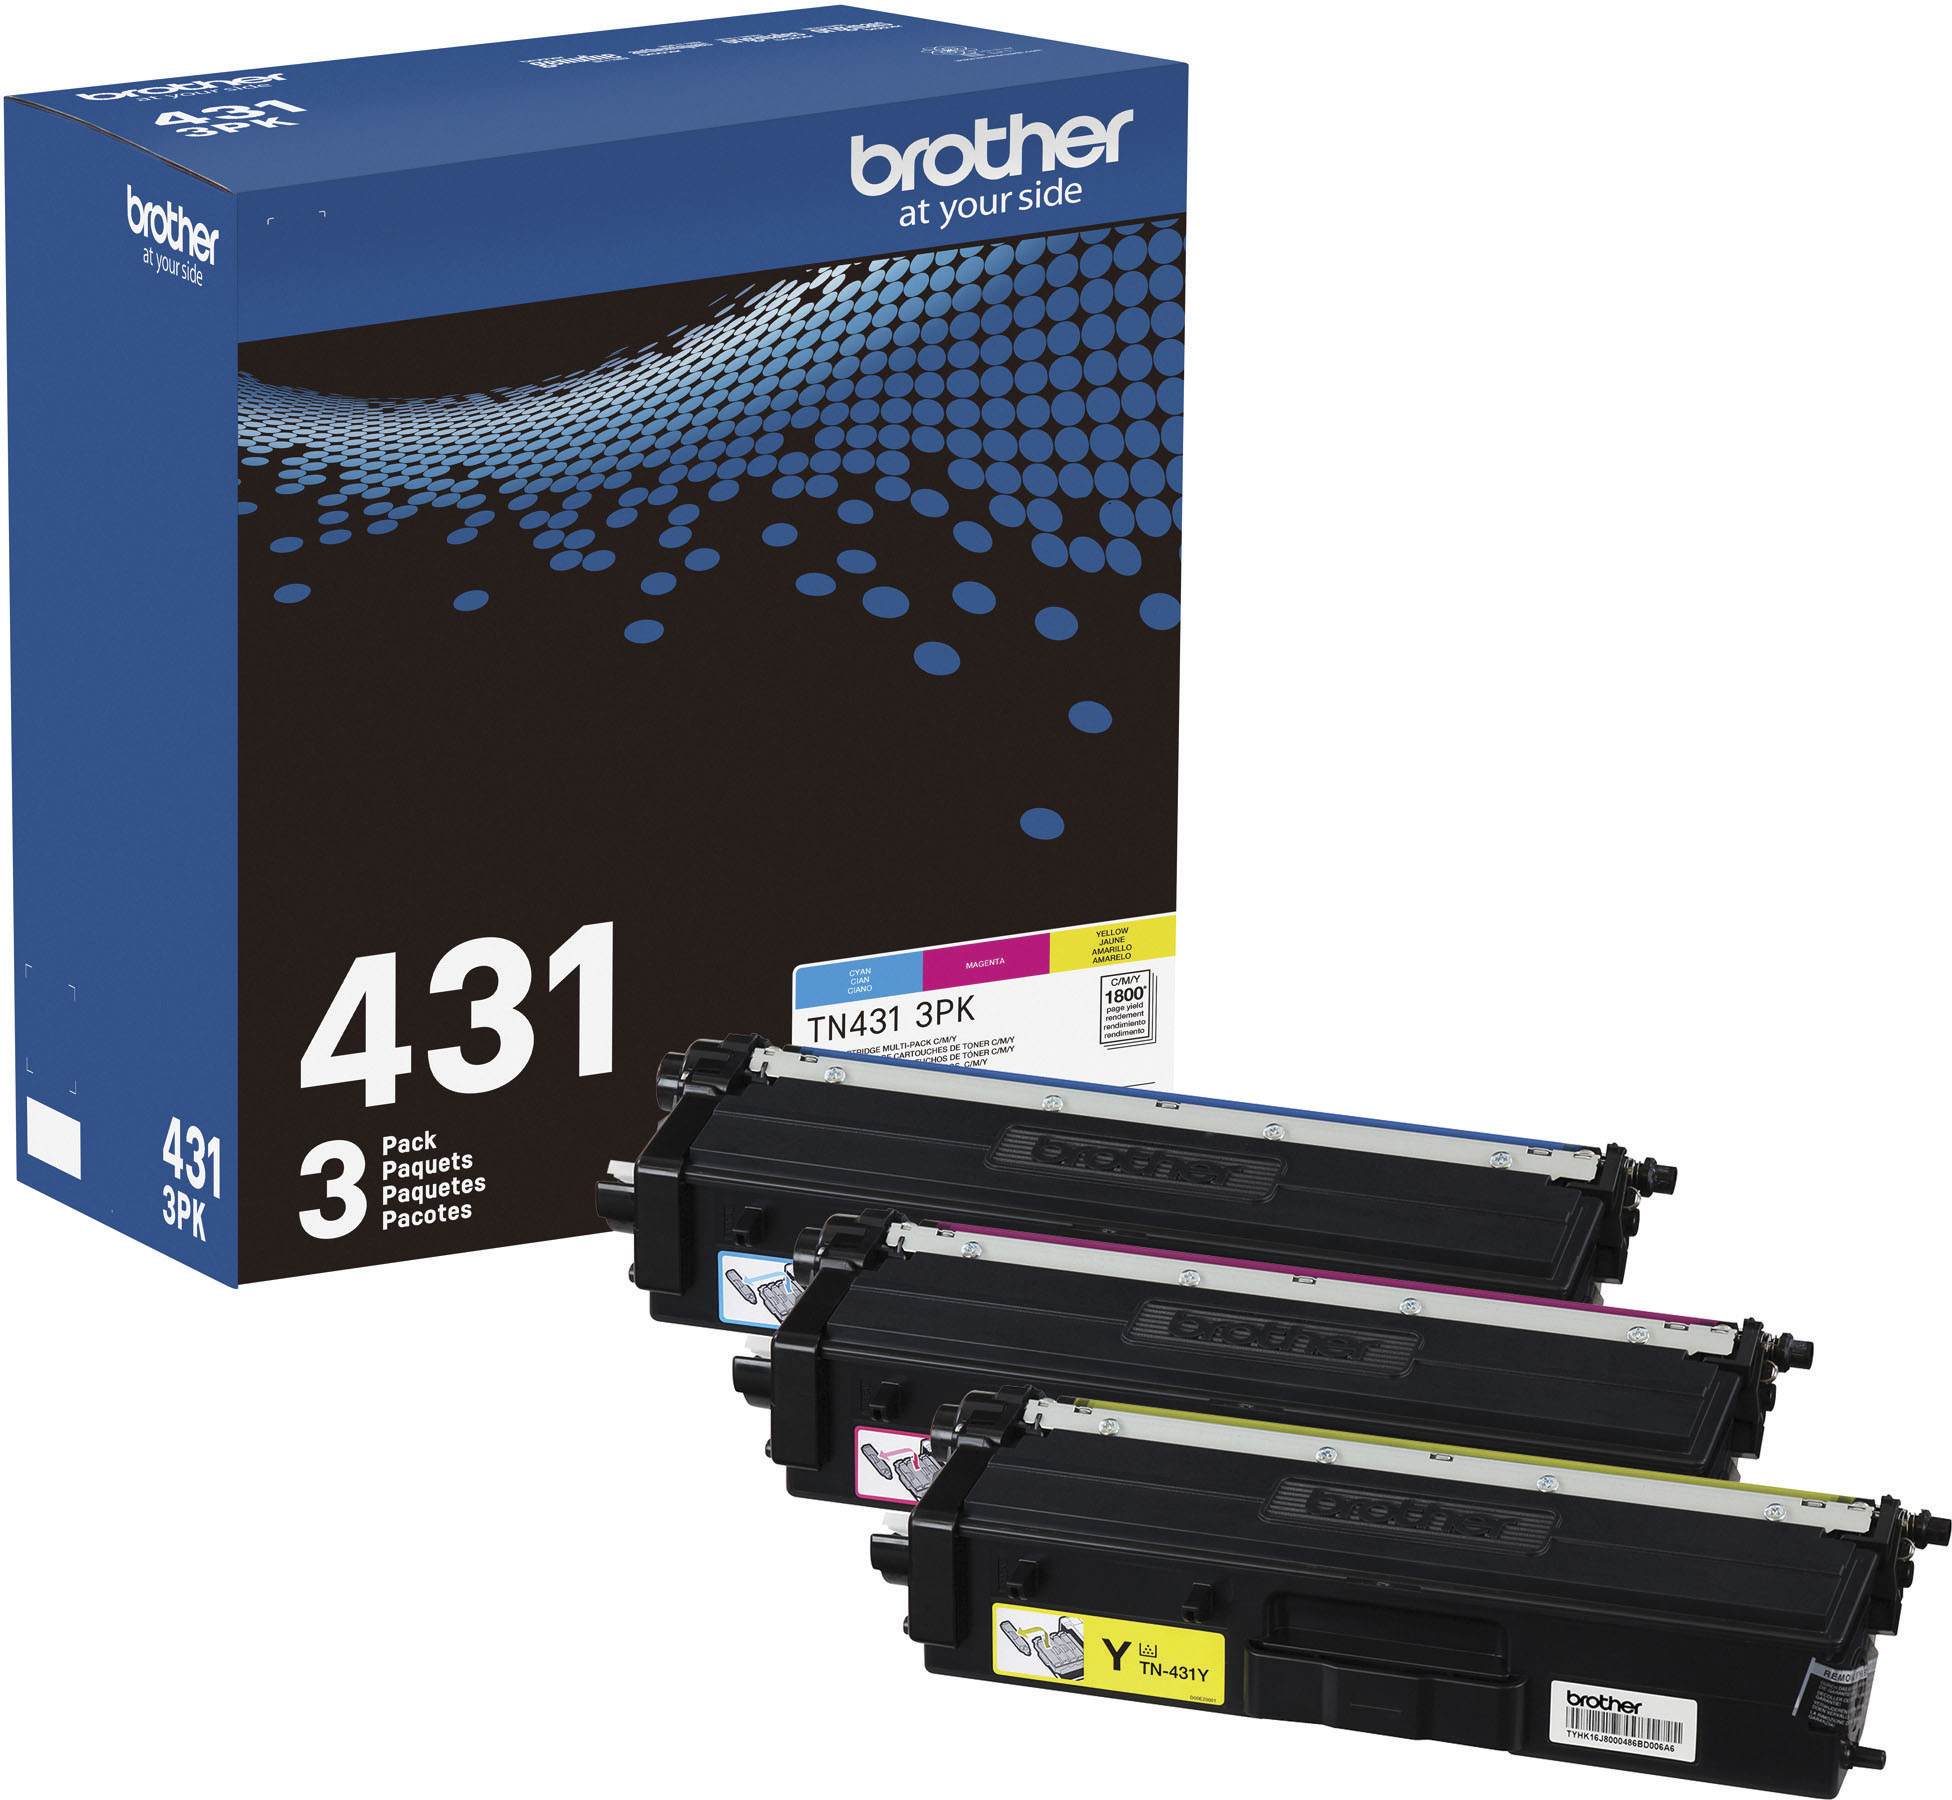 Brother TN243 Standard CMYK Toner Multipack (1,000 Pages* each)